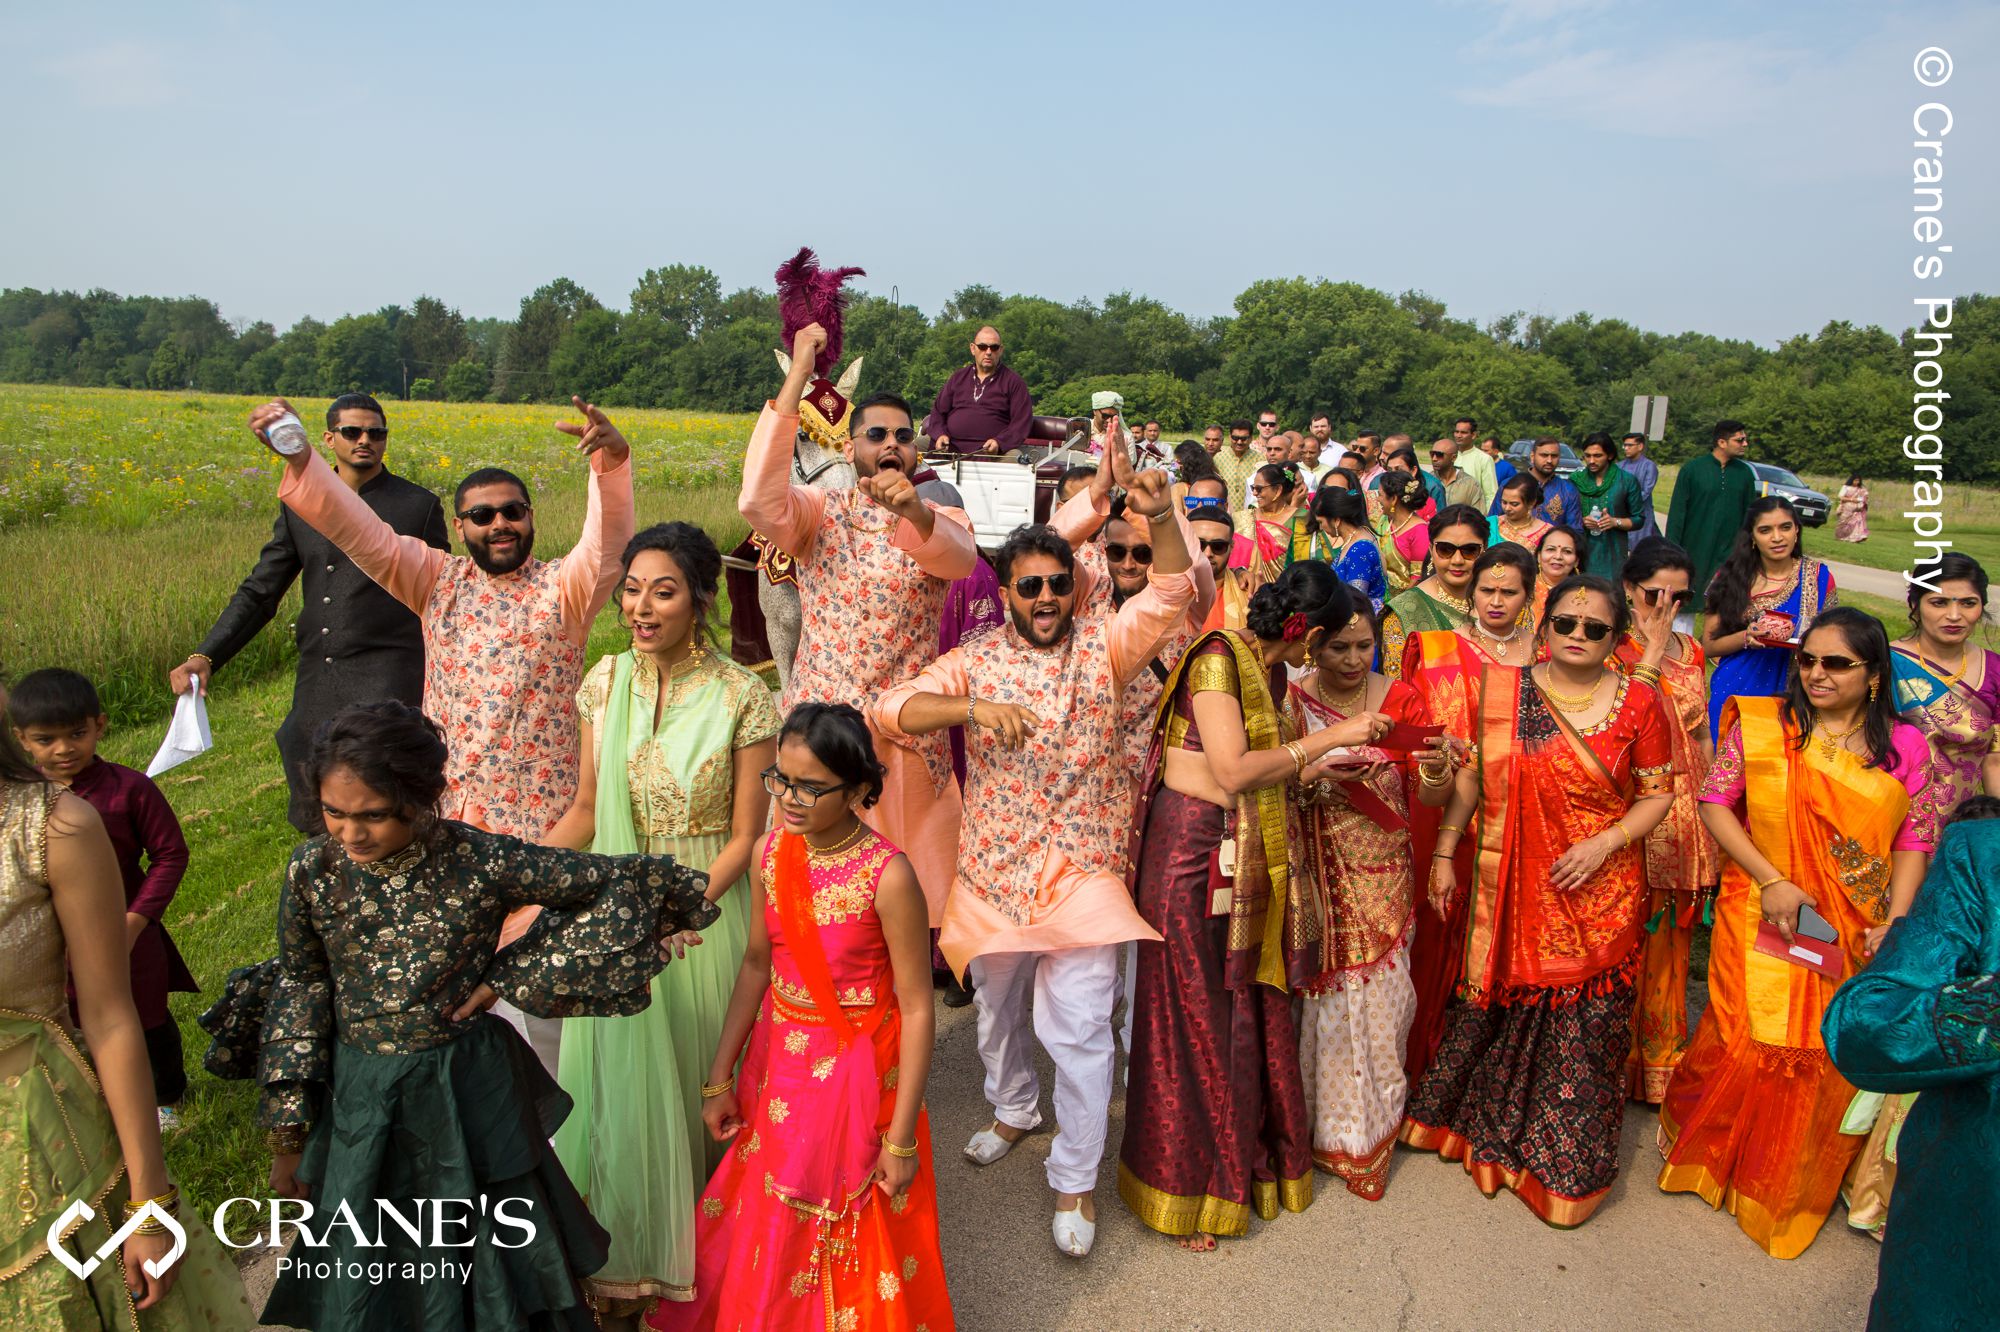 An Indian groom arriving on a horse for his outdoor wedding in Chicago